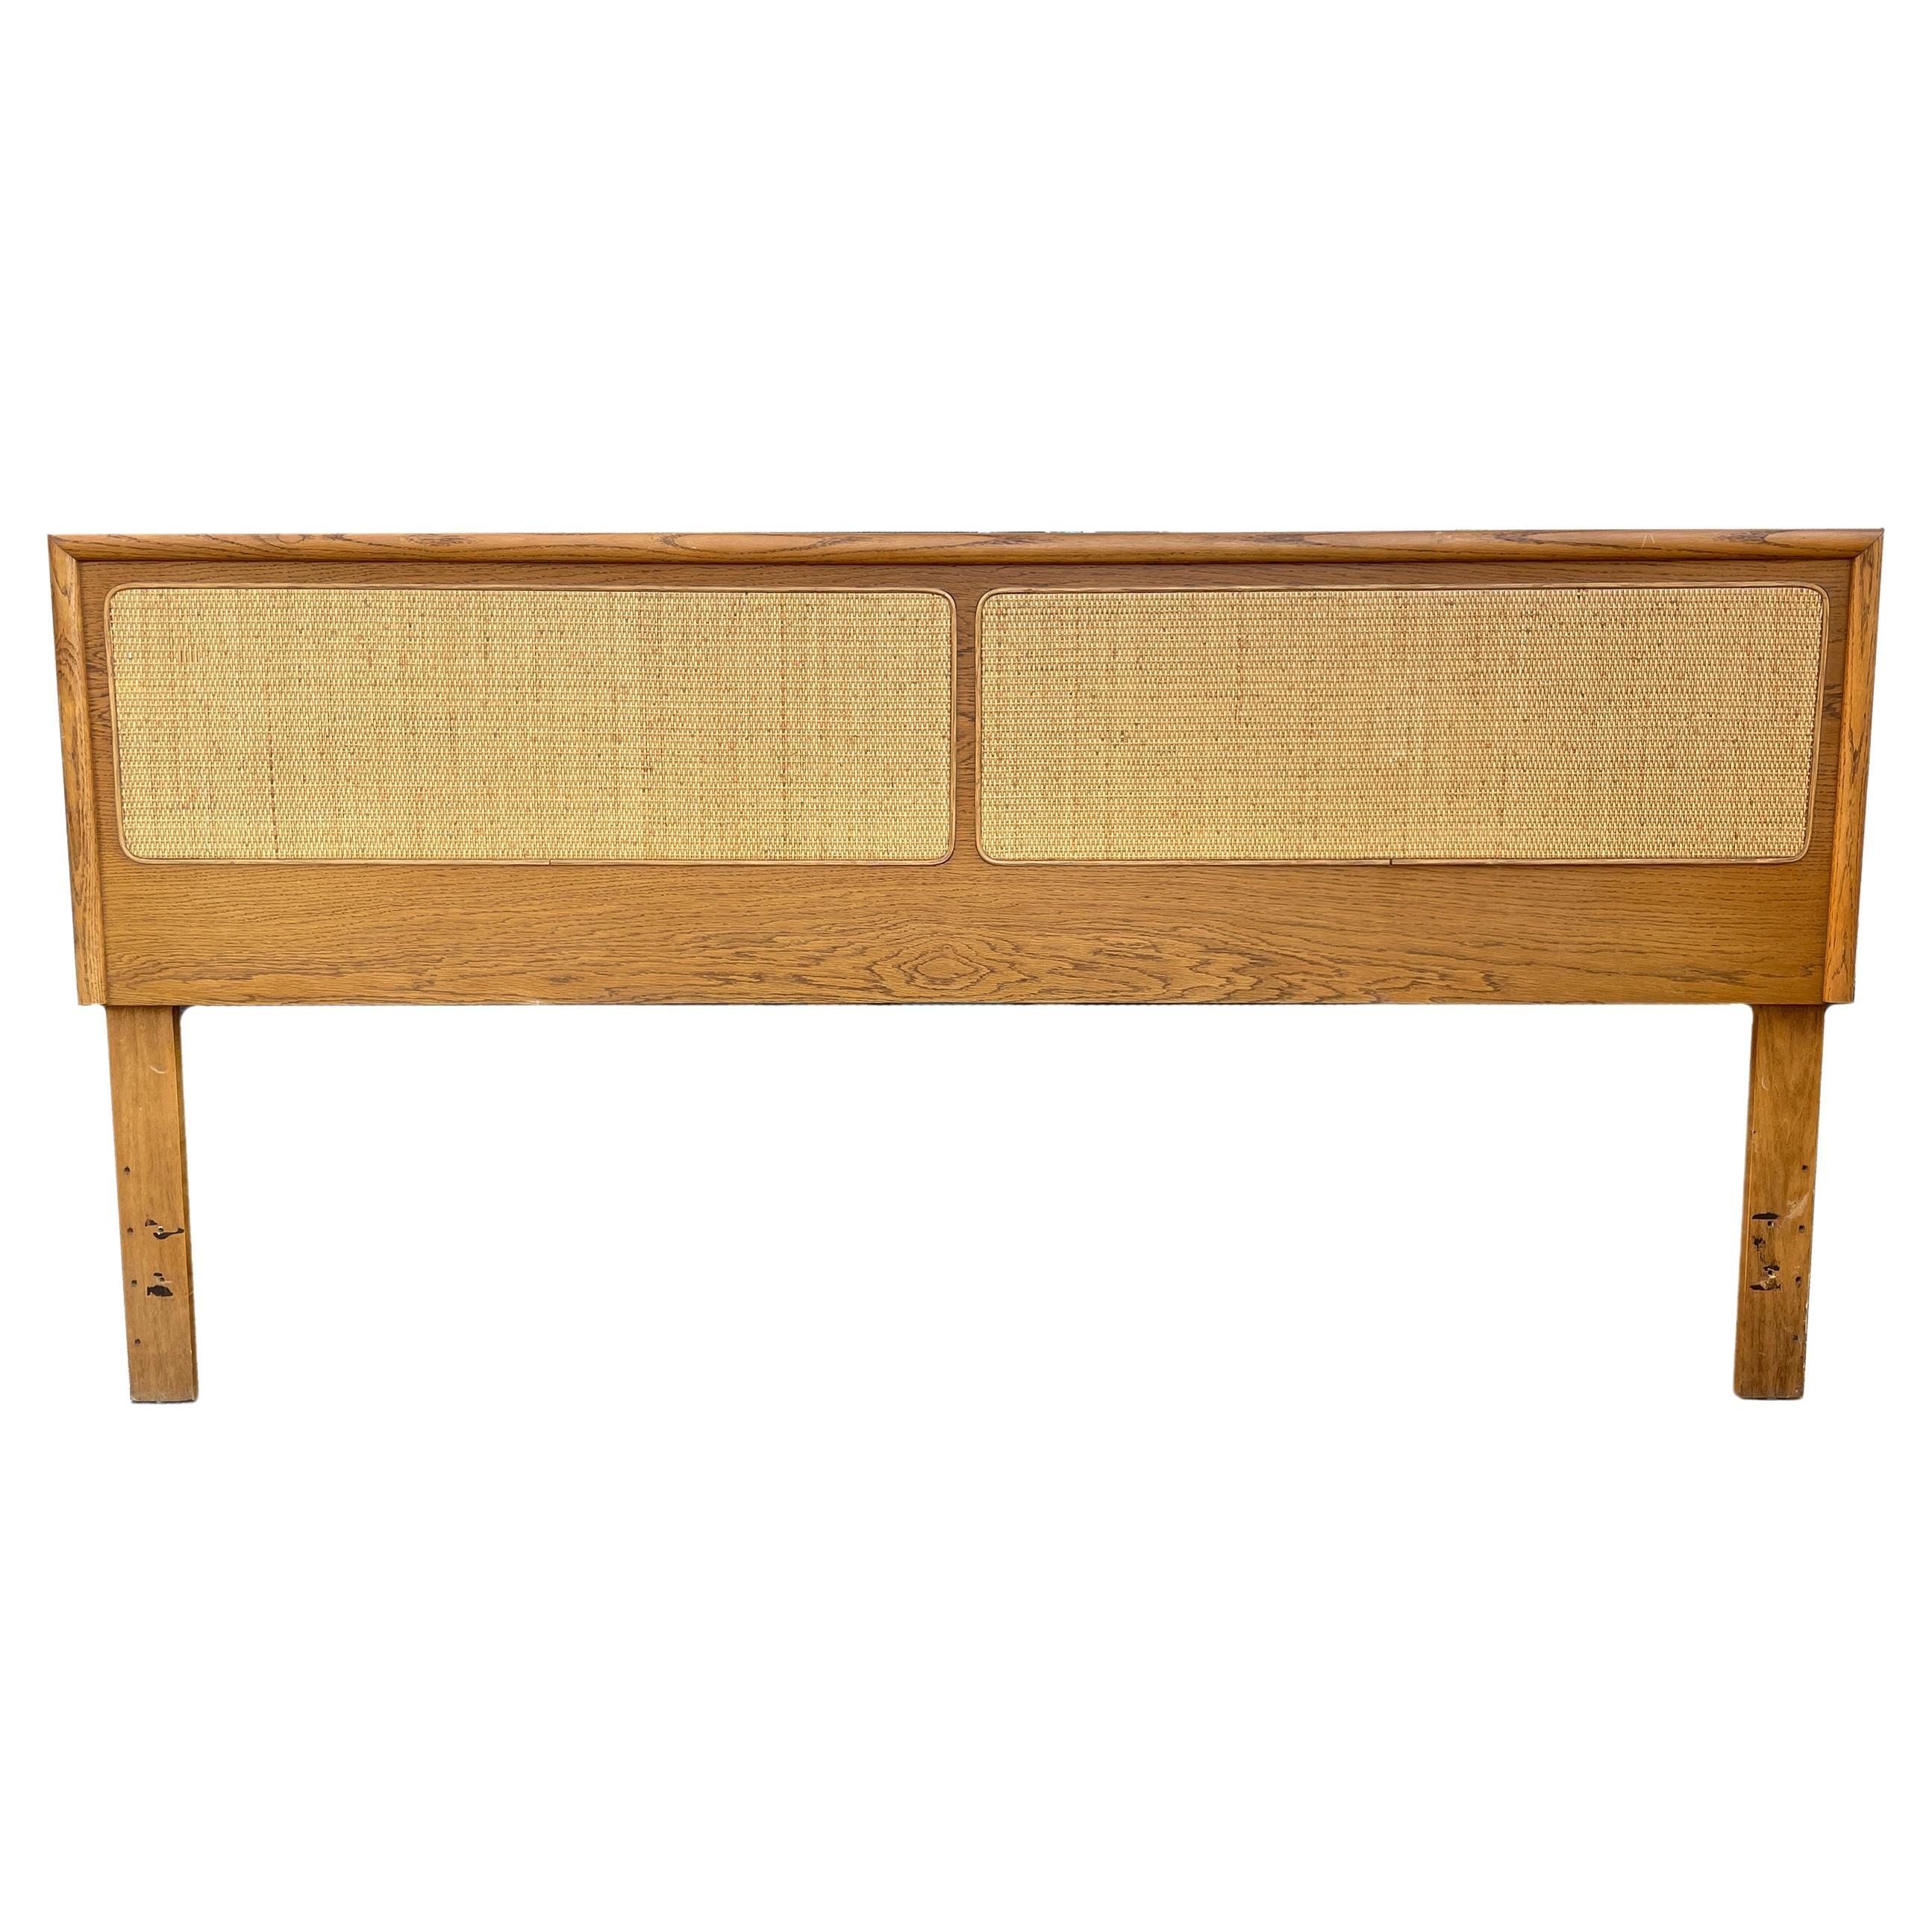 Mid-Century Modern Oak and Cane King Bed Headboard by Lane For Sale